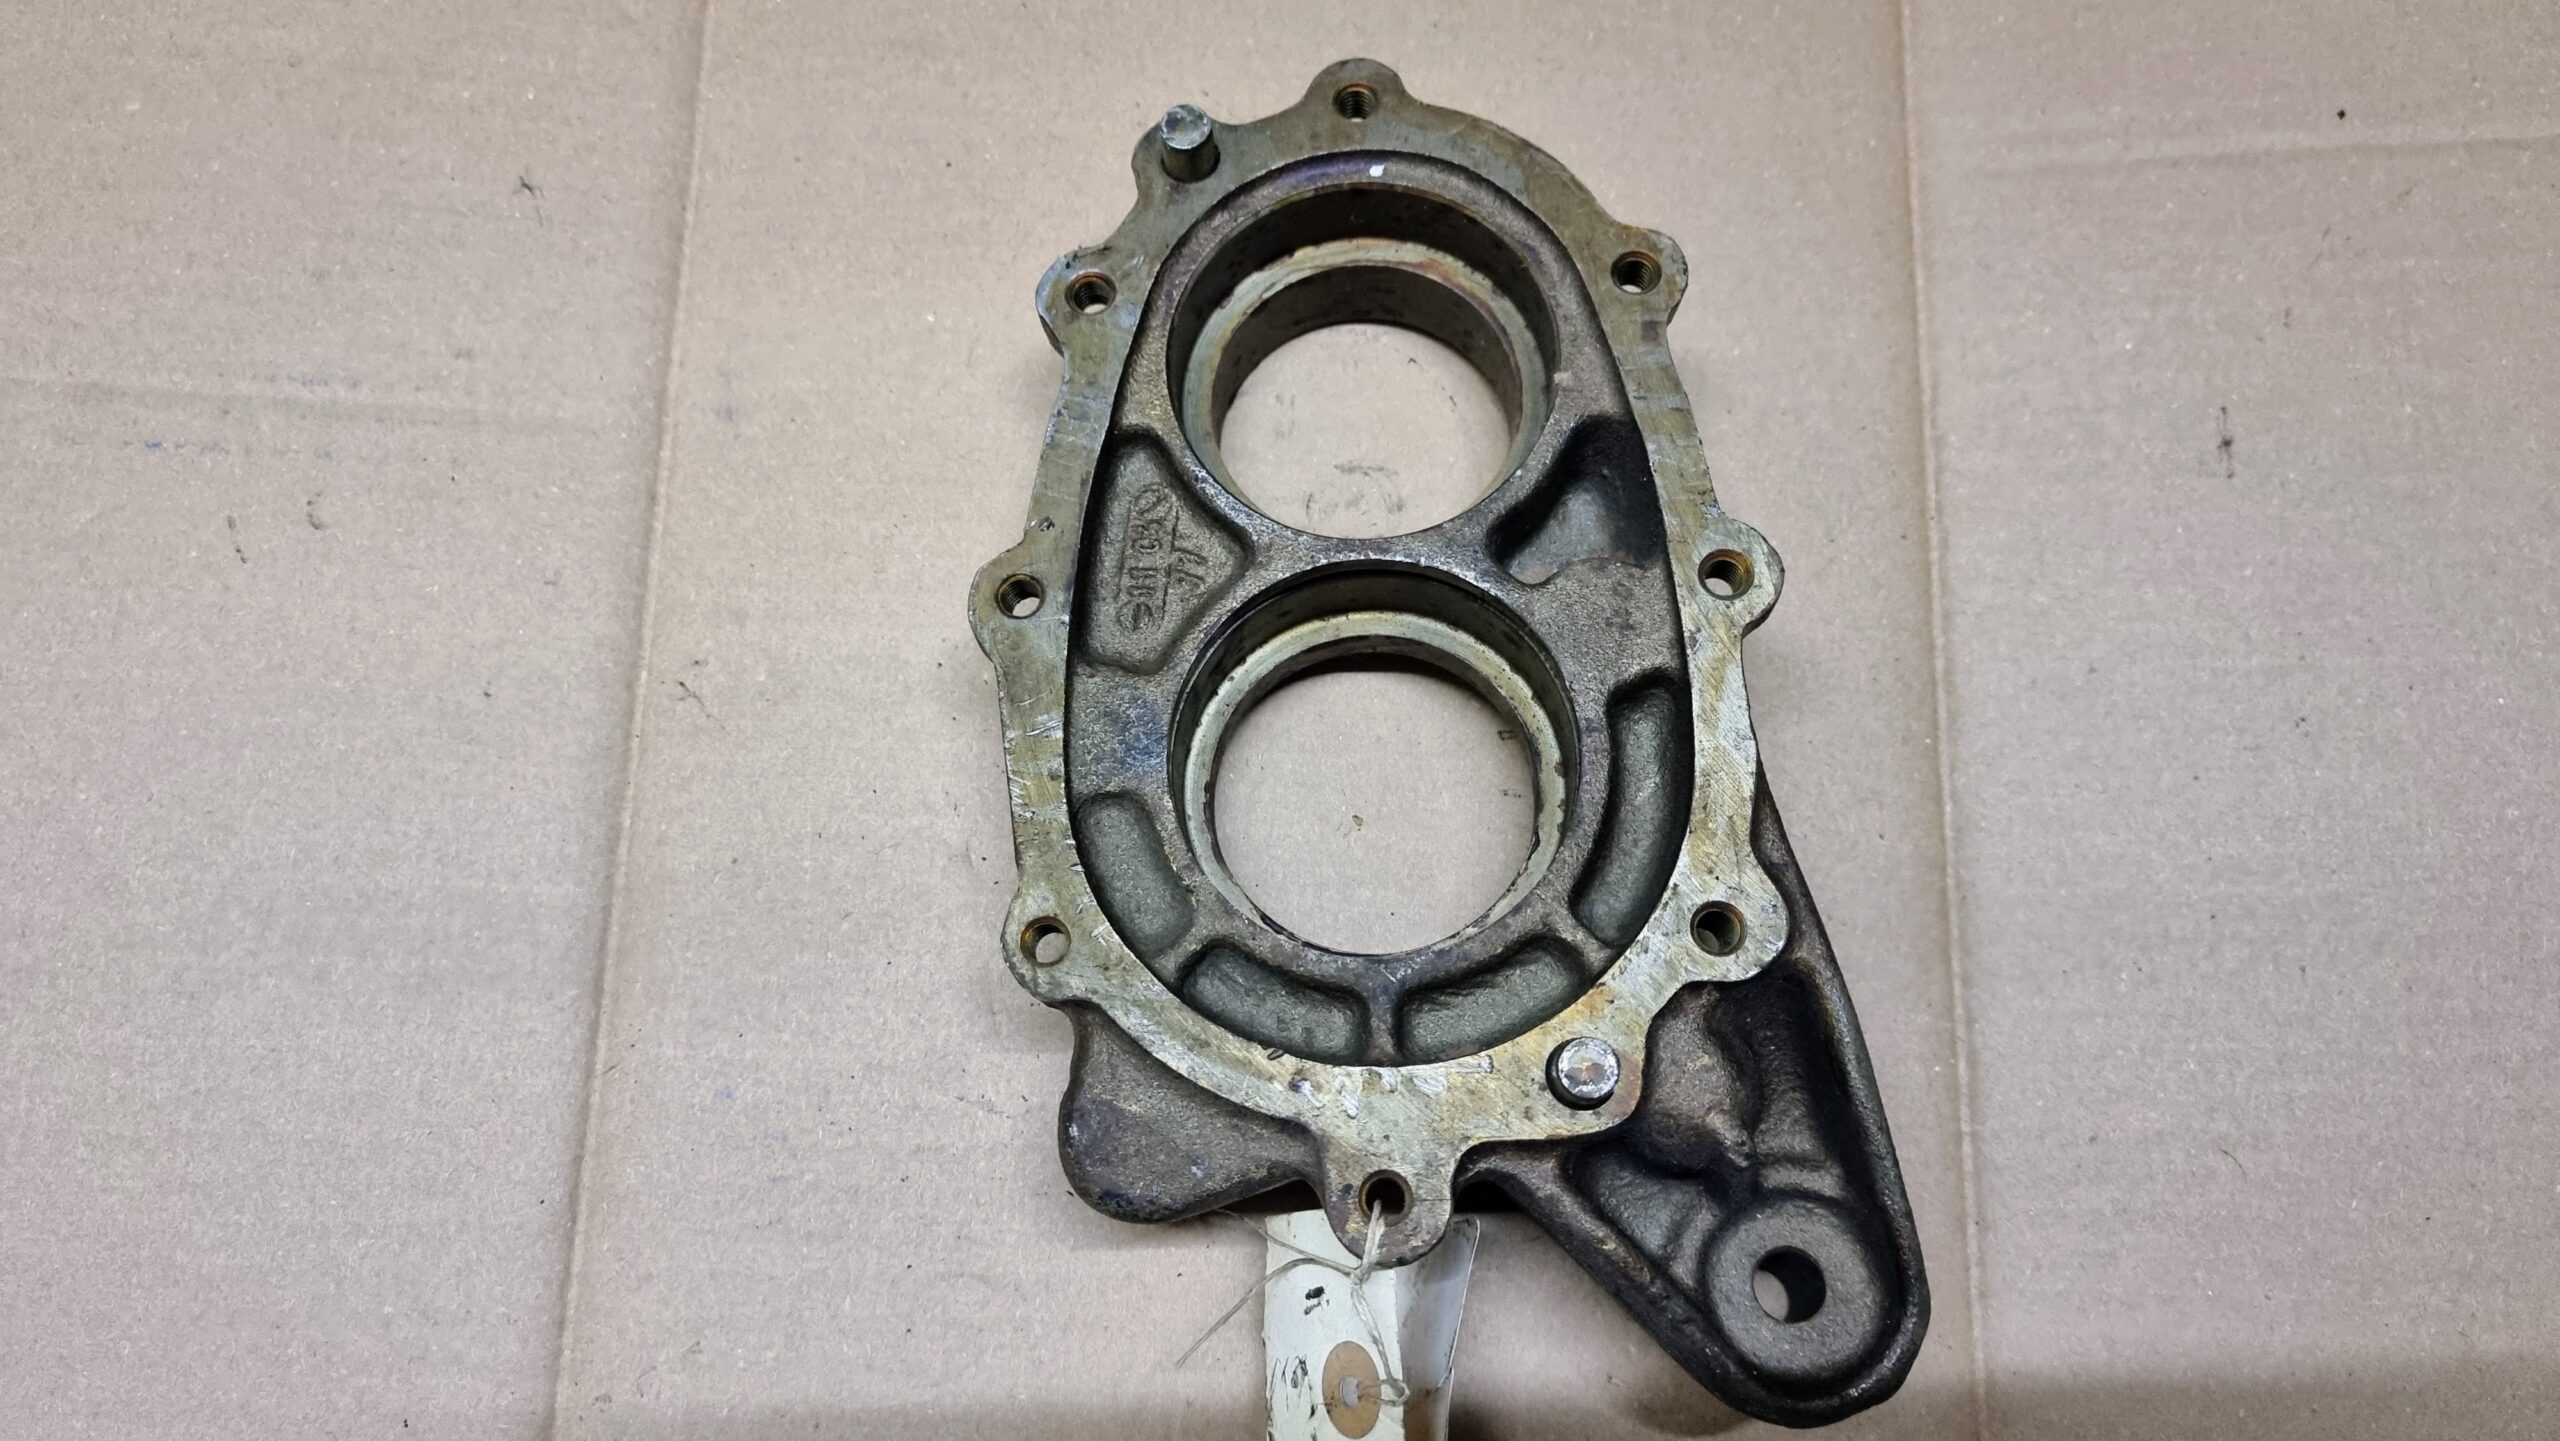 NOS 211501238.1 Housing right, reduction gear